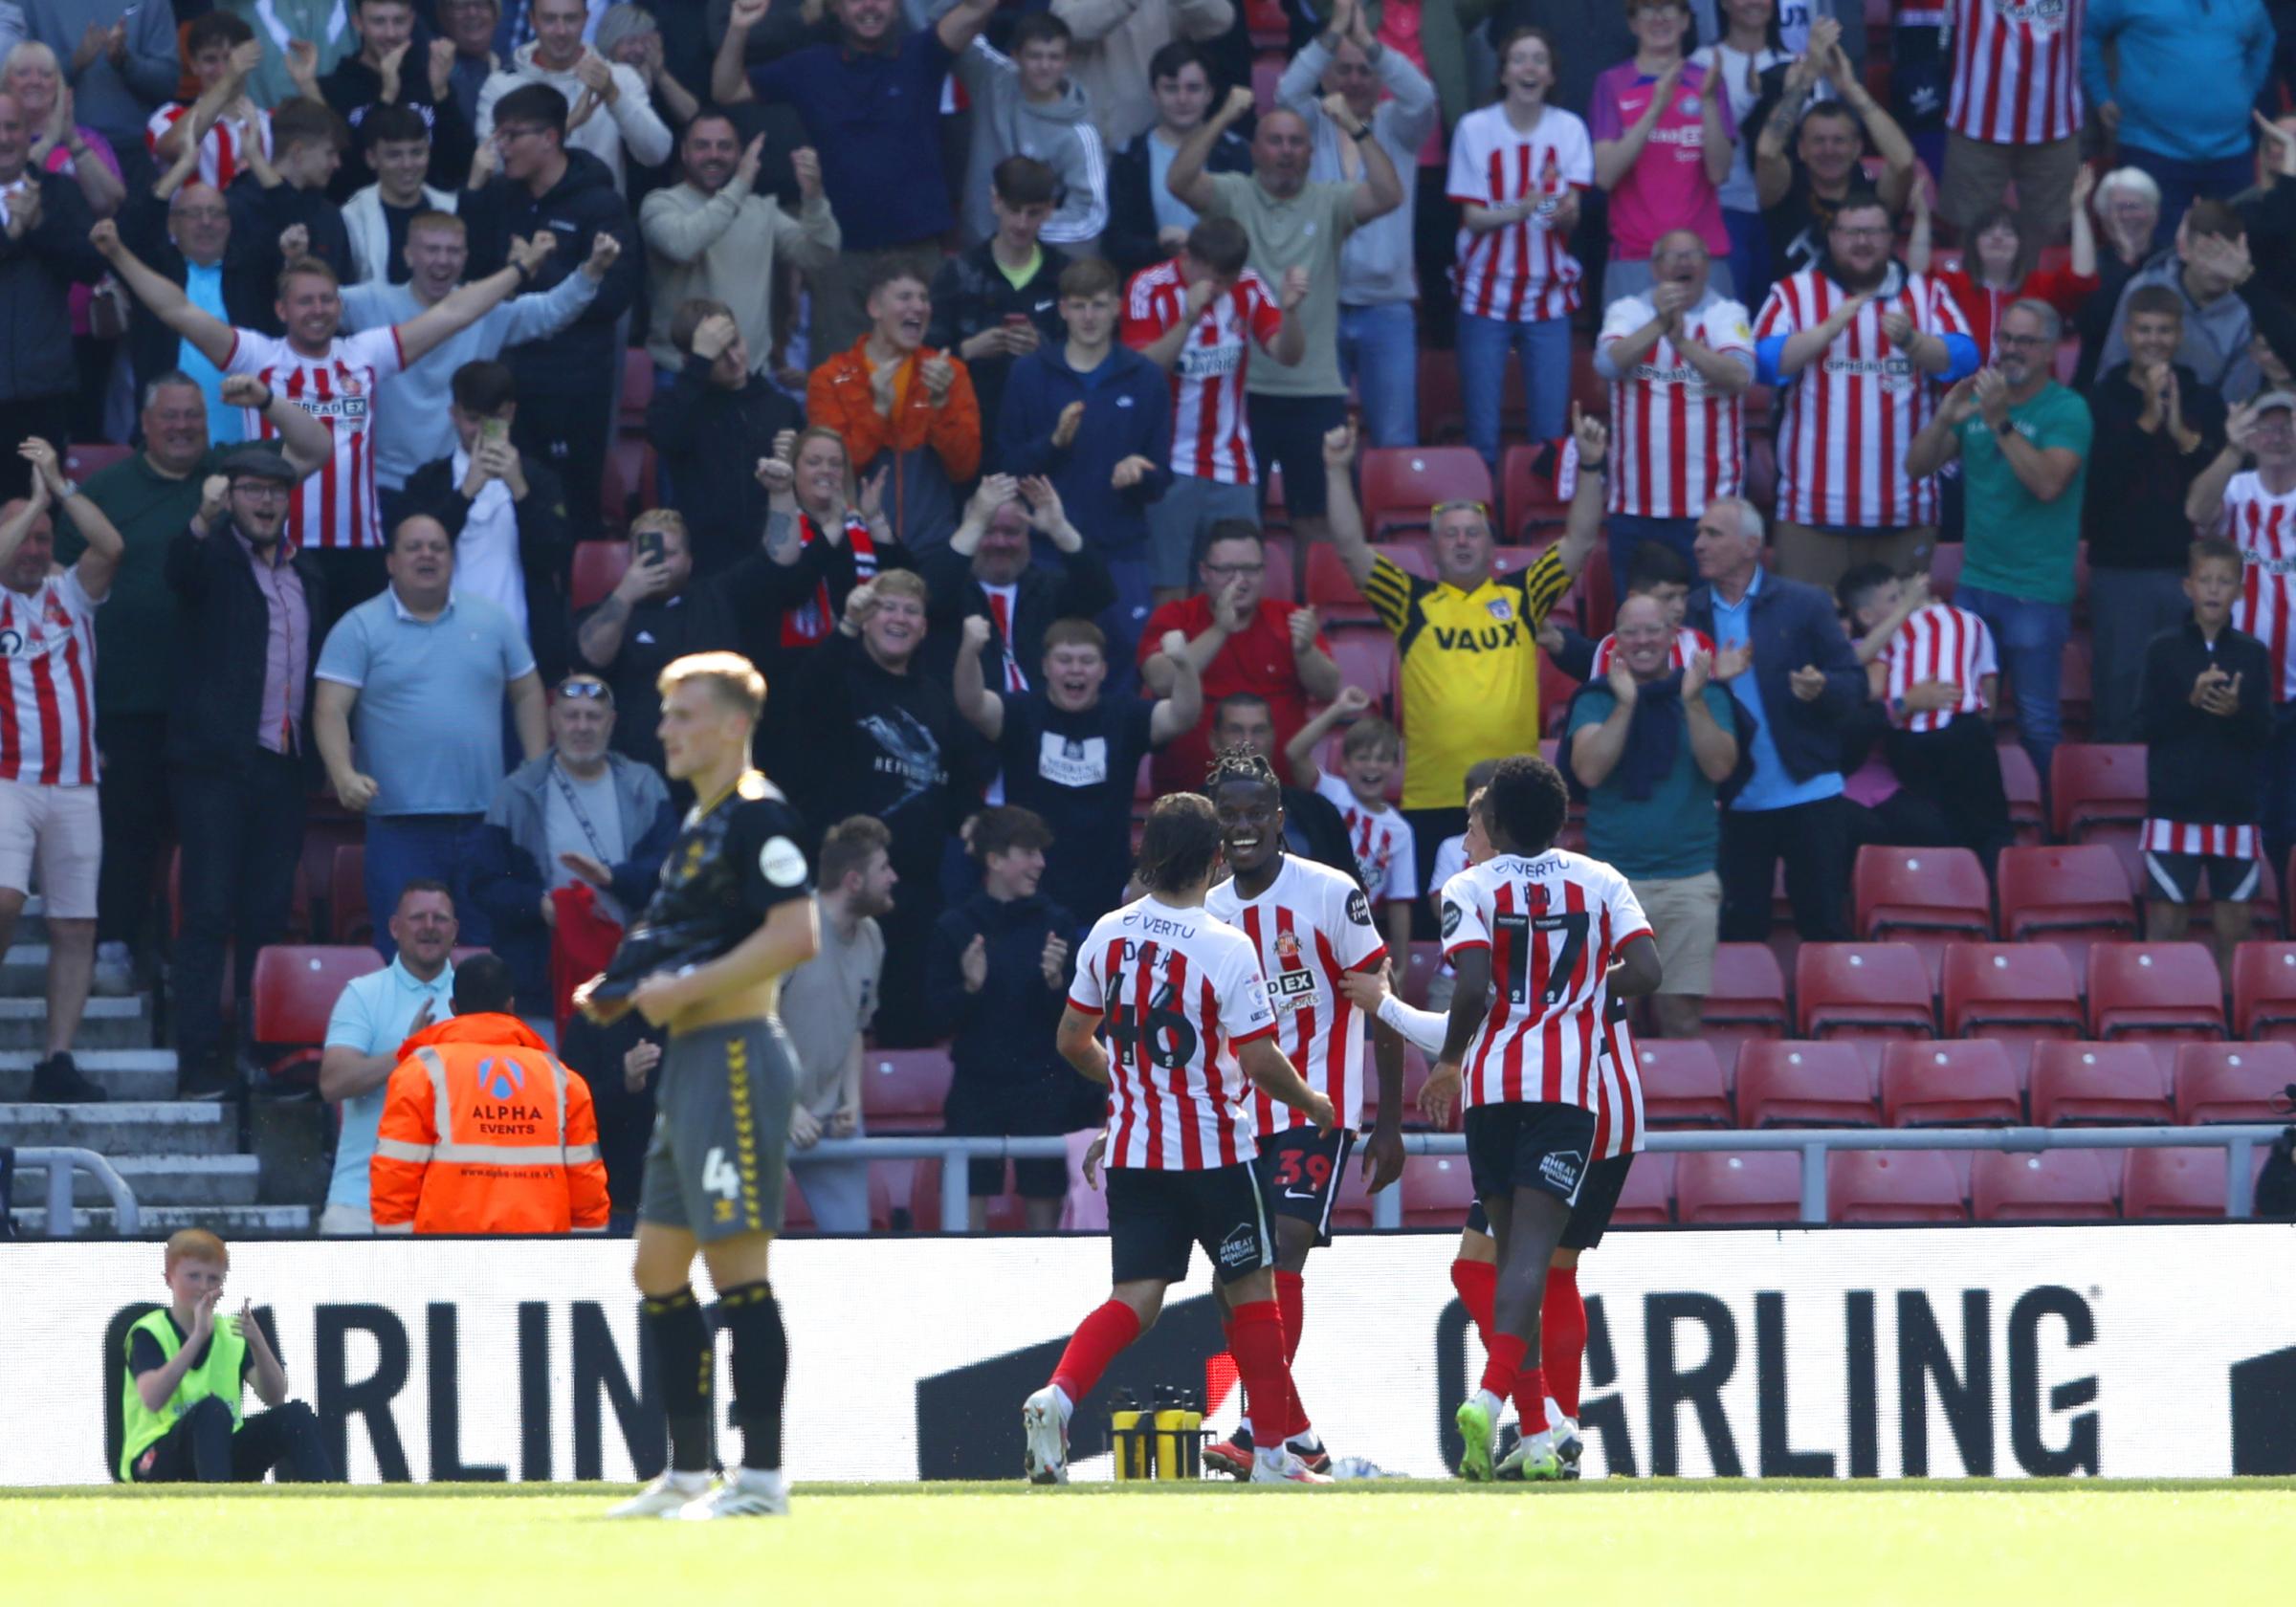 Southampton humbled up north but journey destination not yet altered